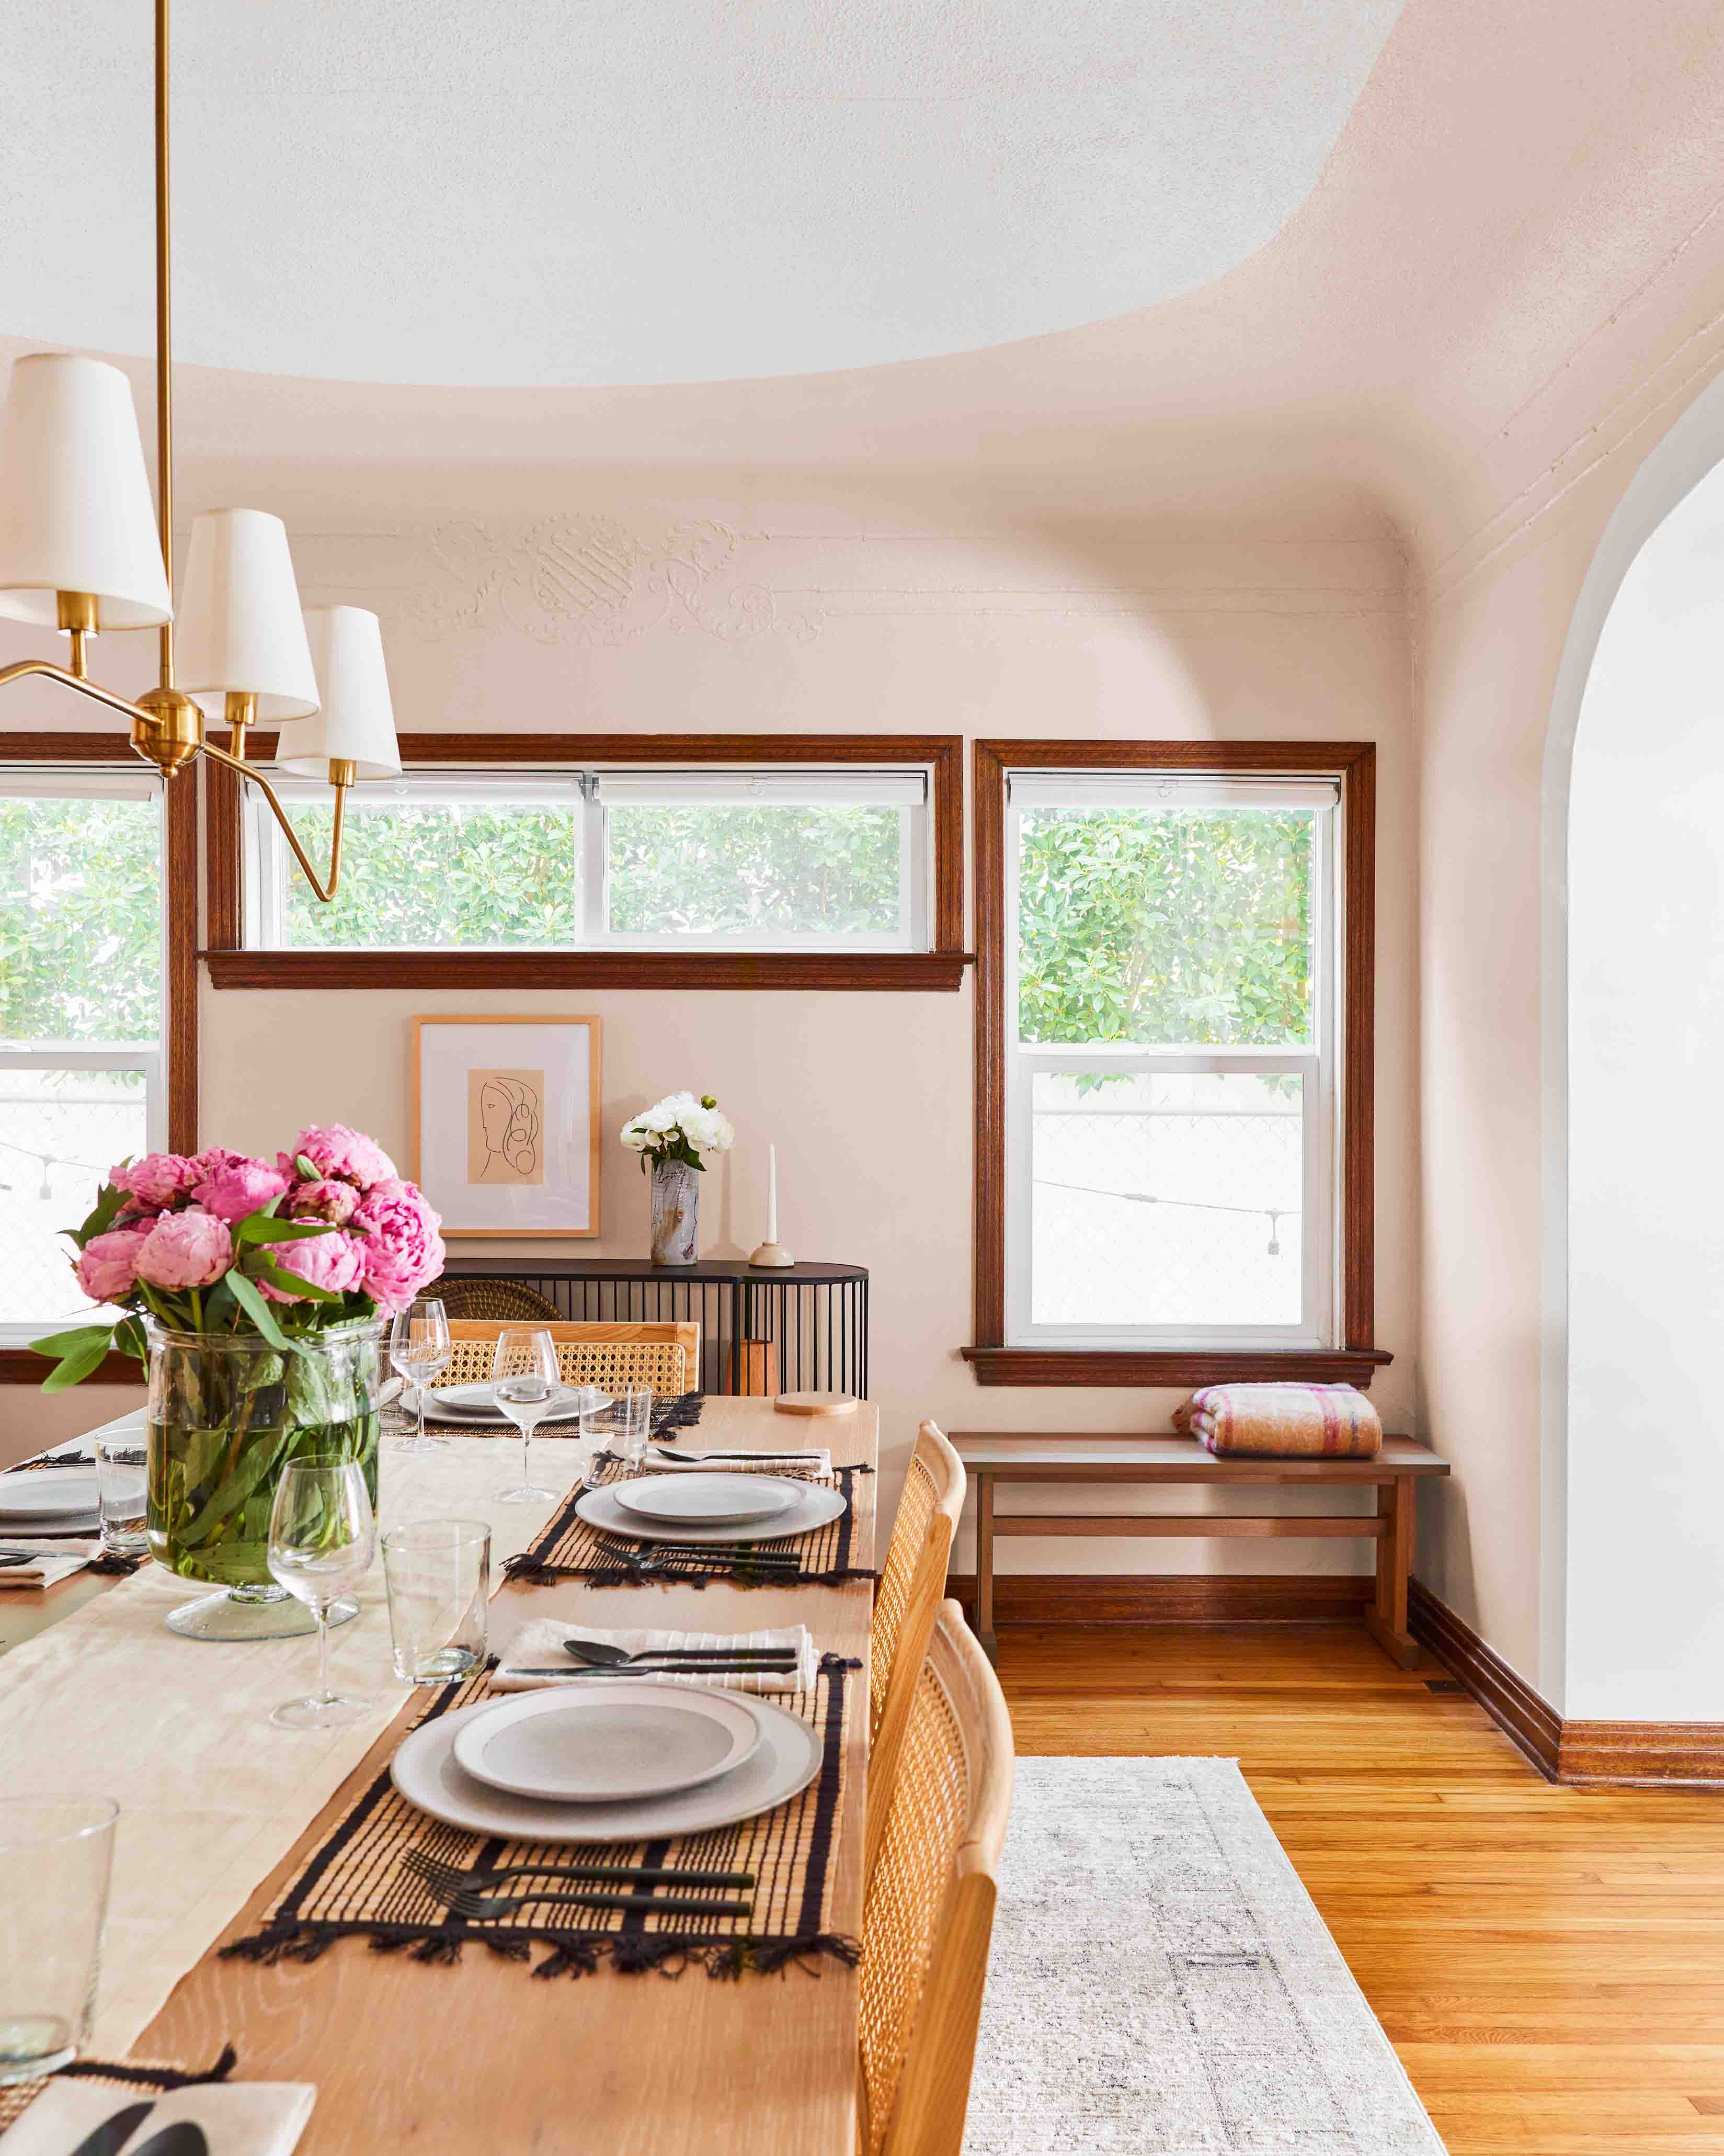 Blush pink wins best dining room color in this space, especially when mixed with light wood tones.